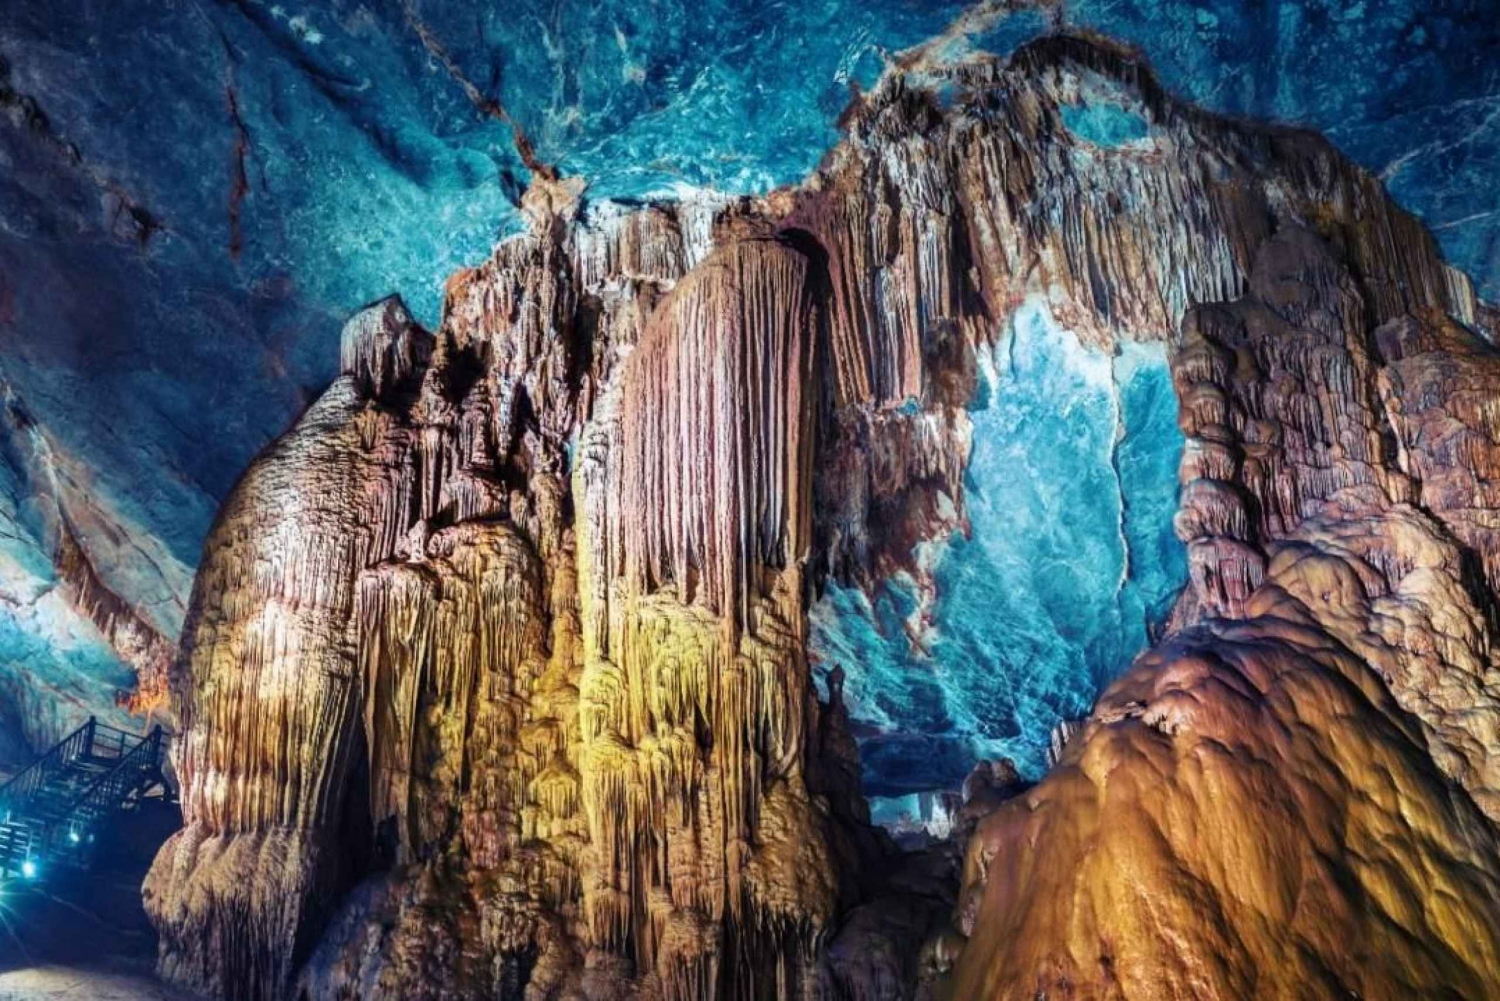 From Hue: Explore Phong Nha Cave Guide Tour/Only On Odd Days